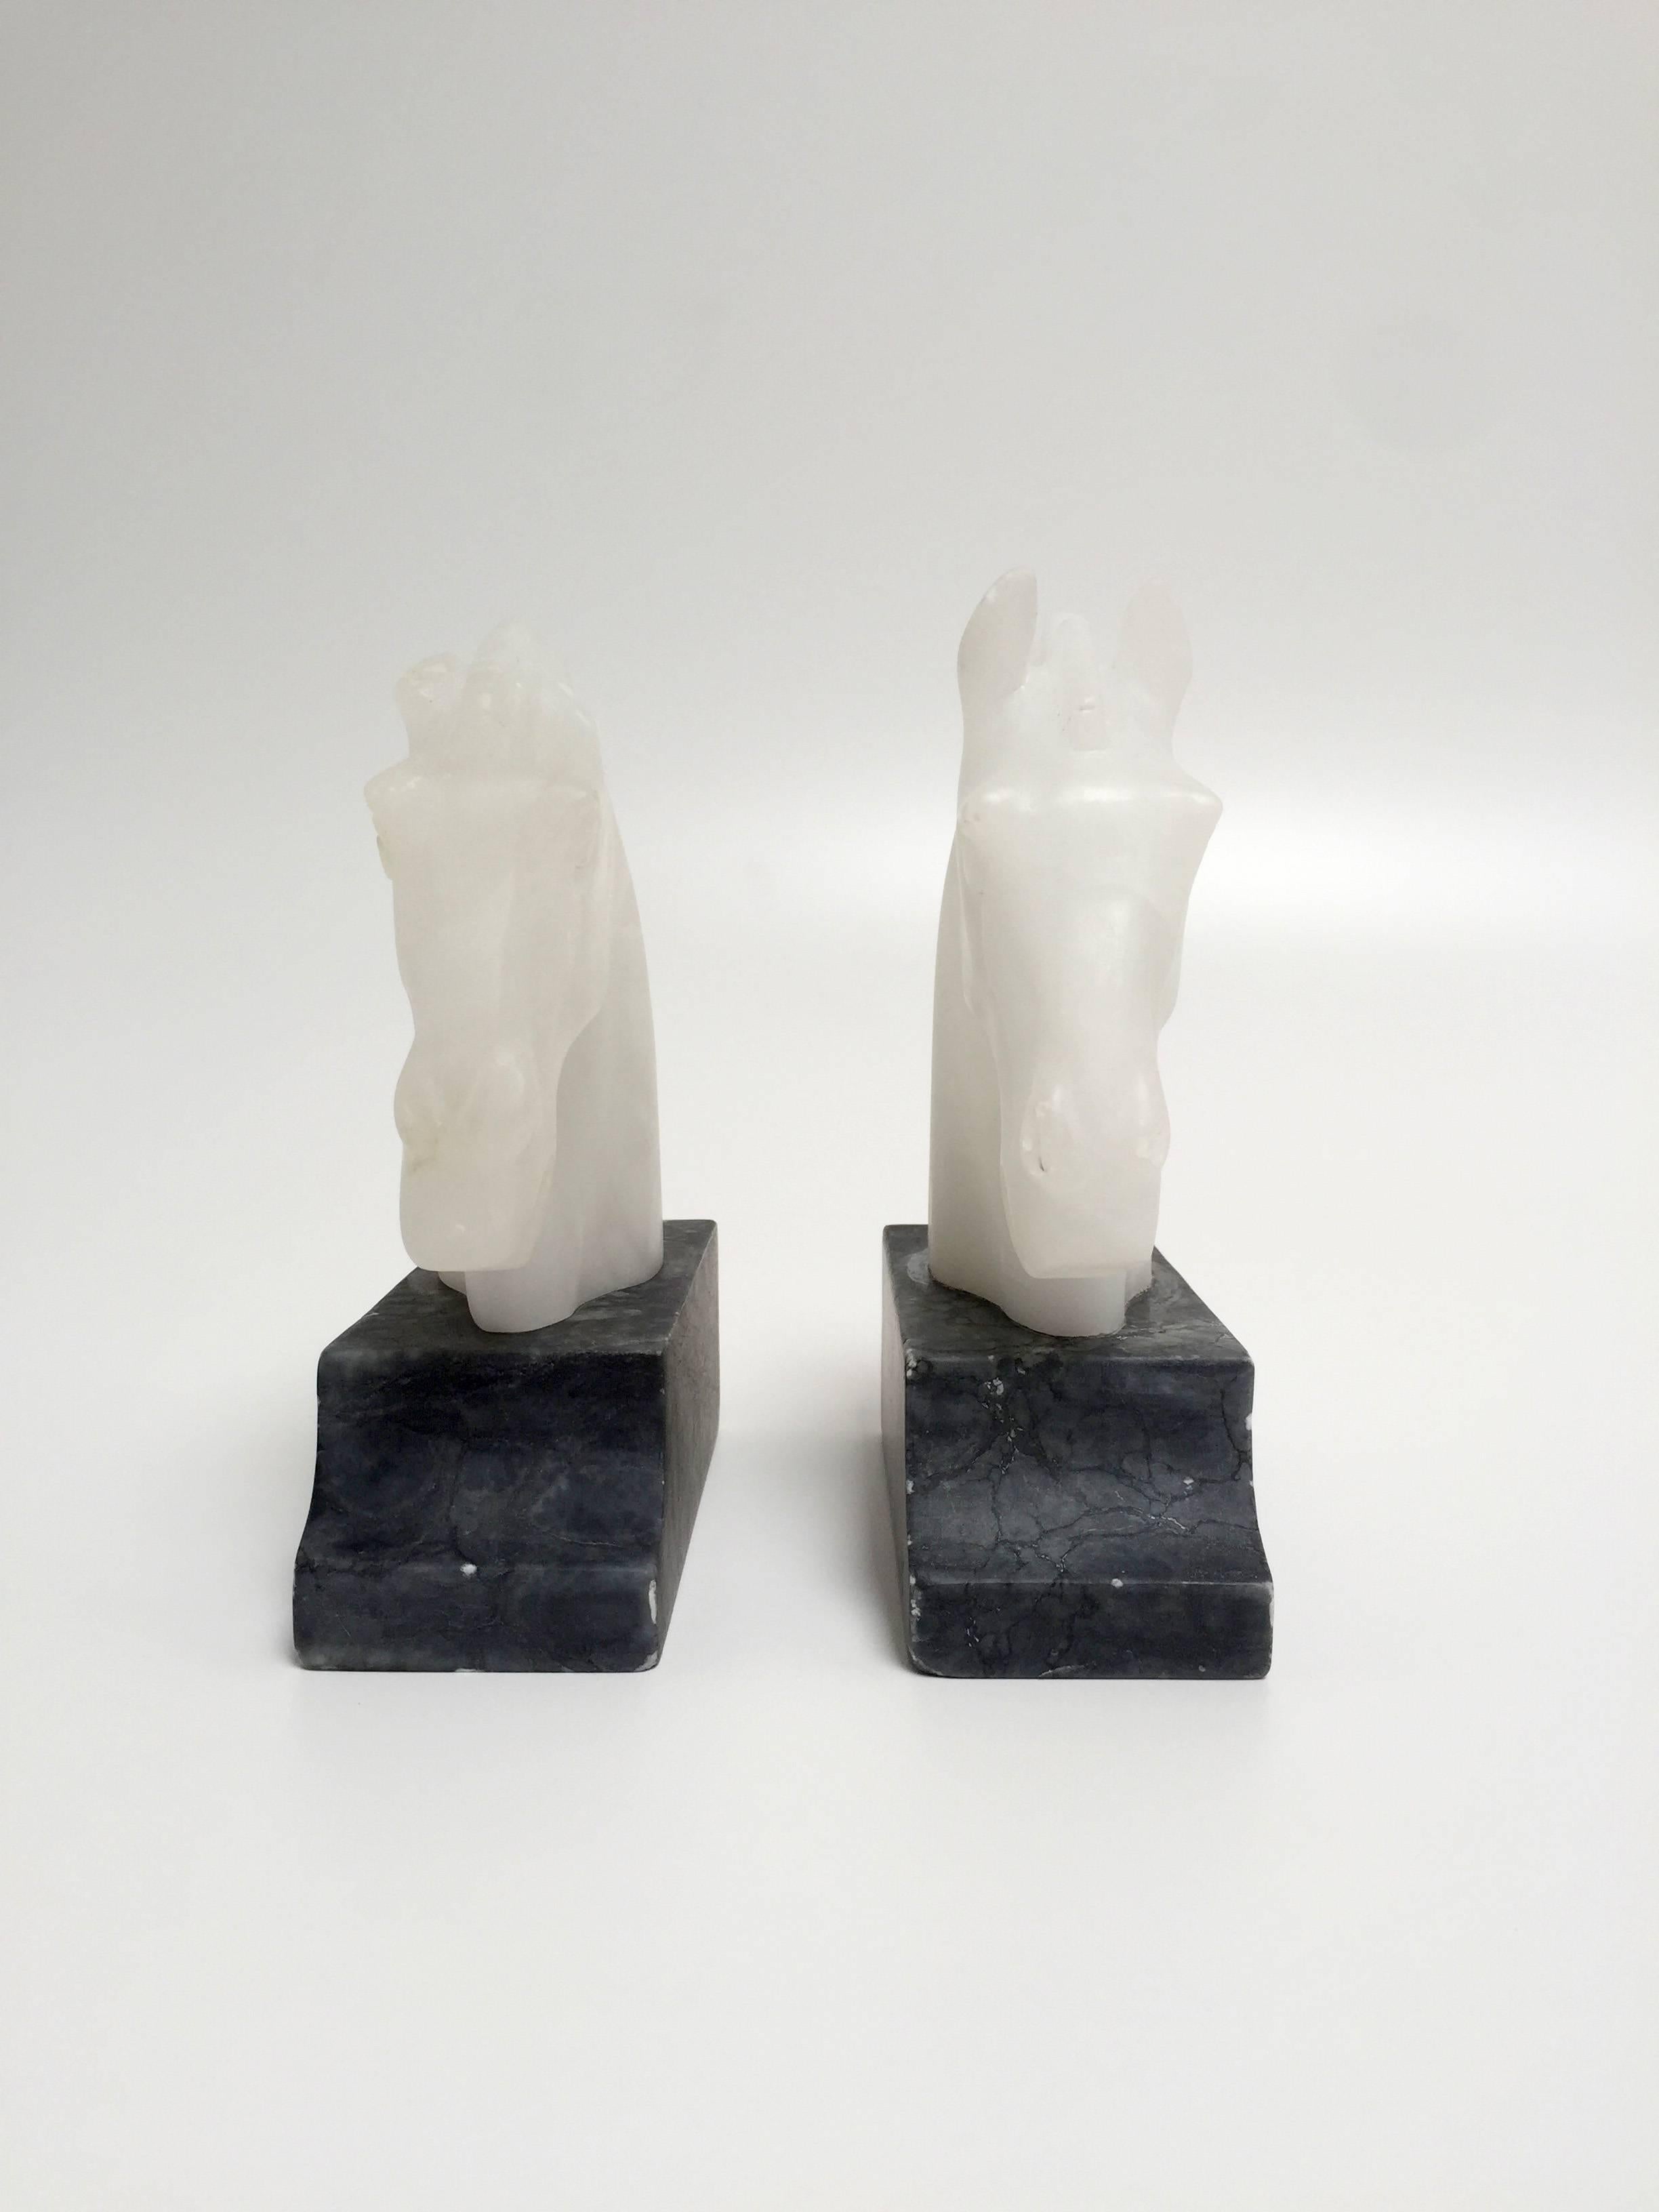 Lovely vintage pair of alabaster and dark stone horse head bookends.